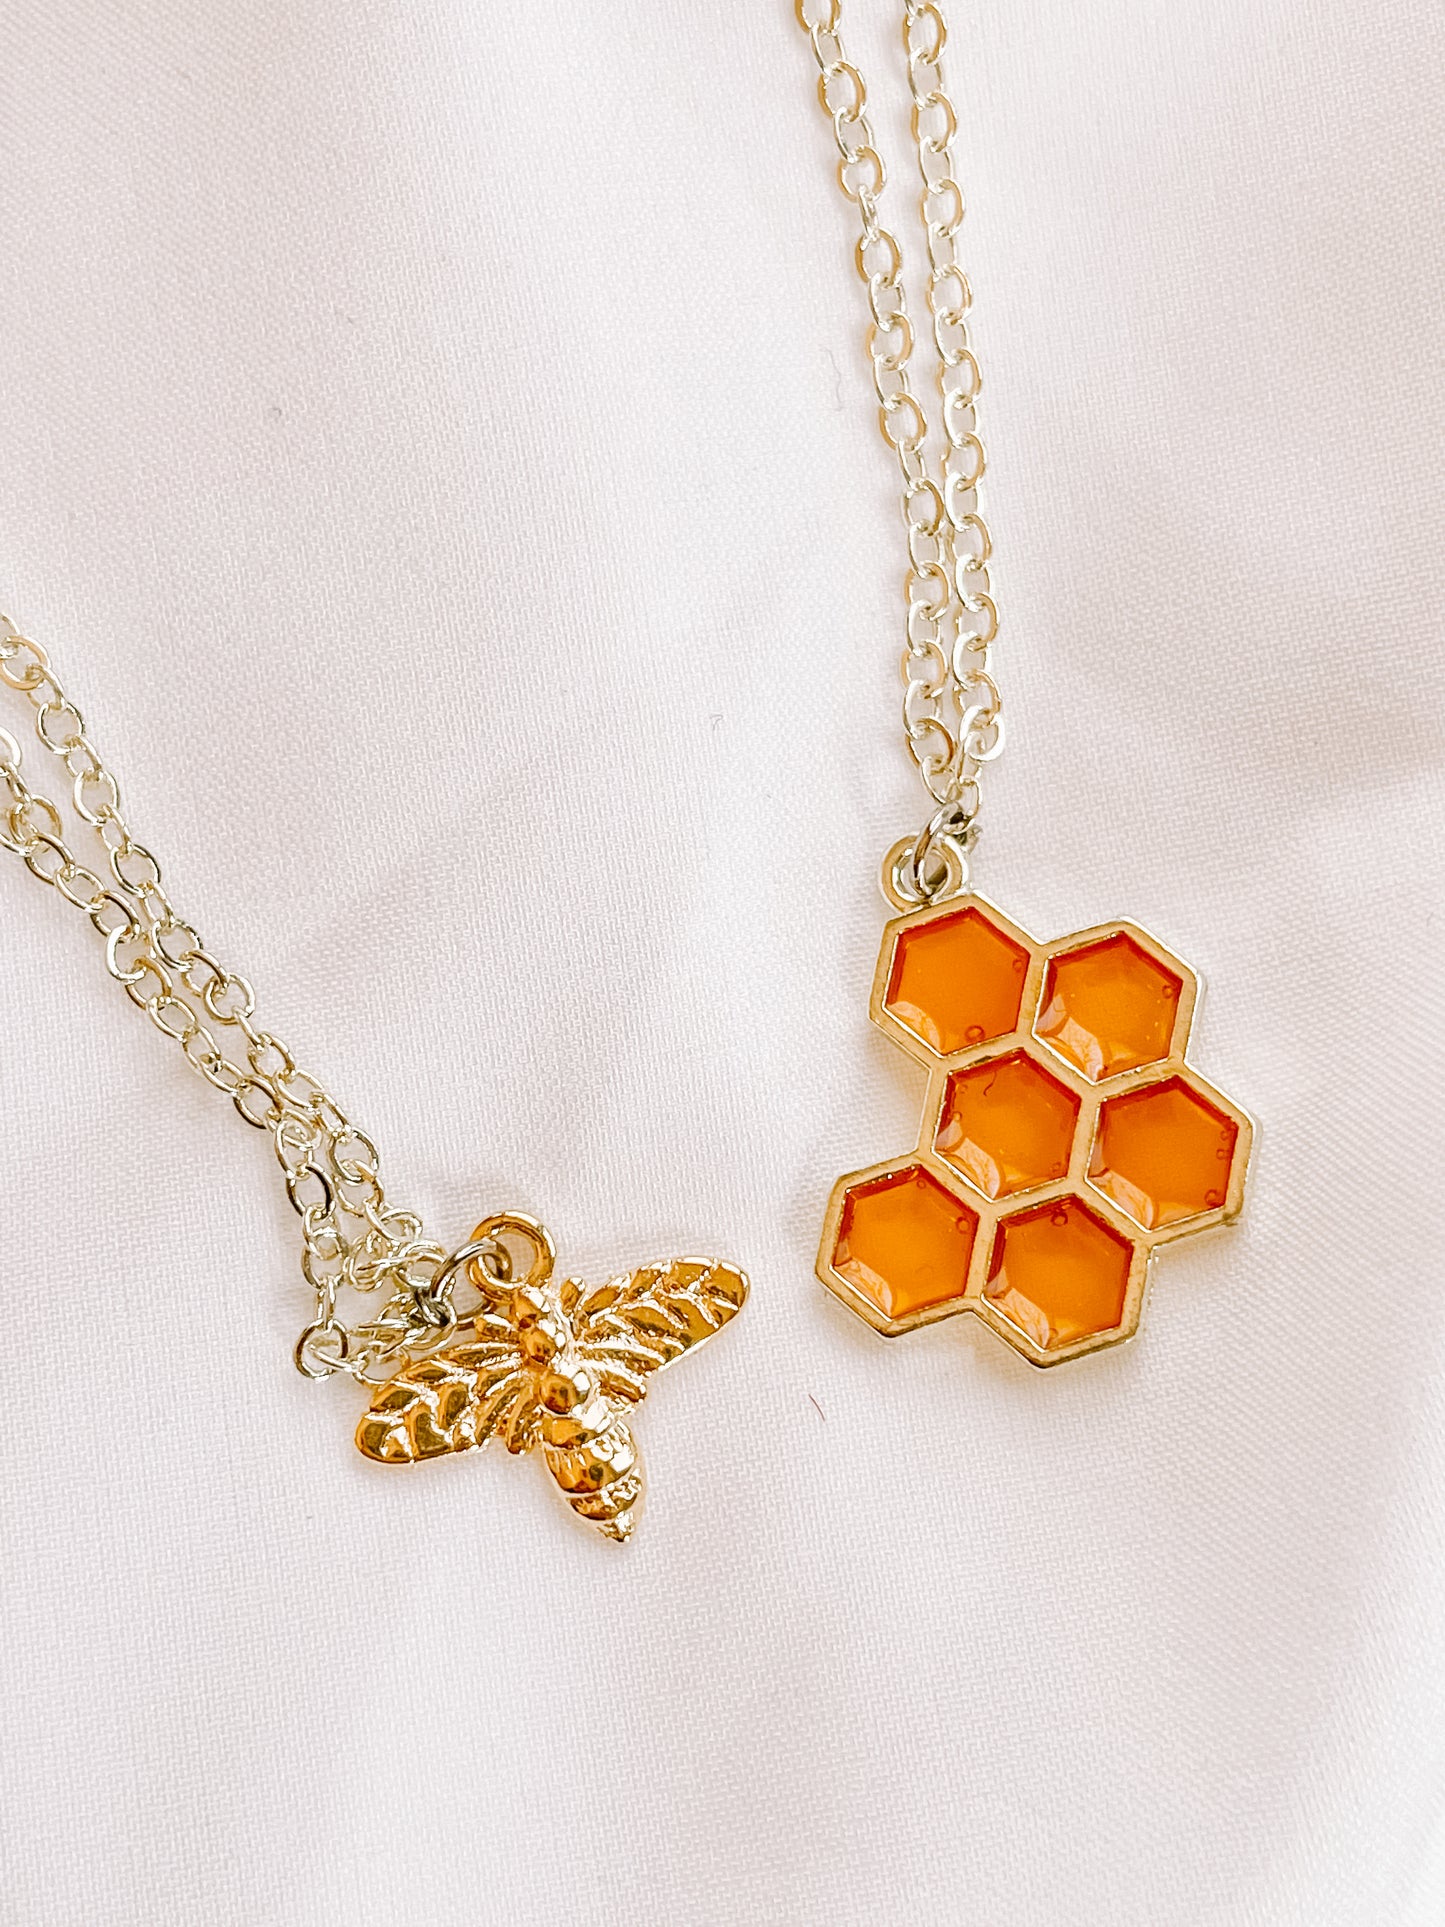 Gold honeycomb necklace